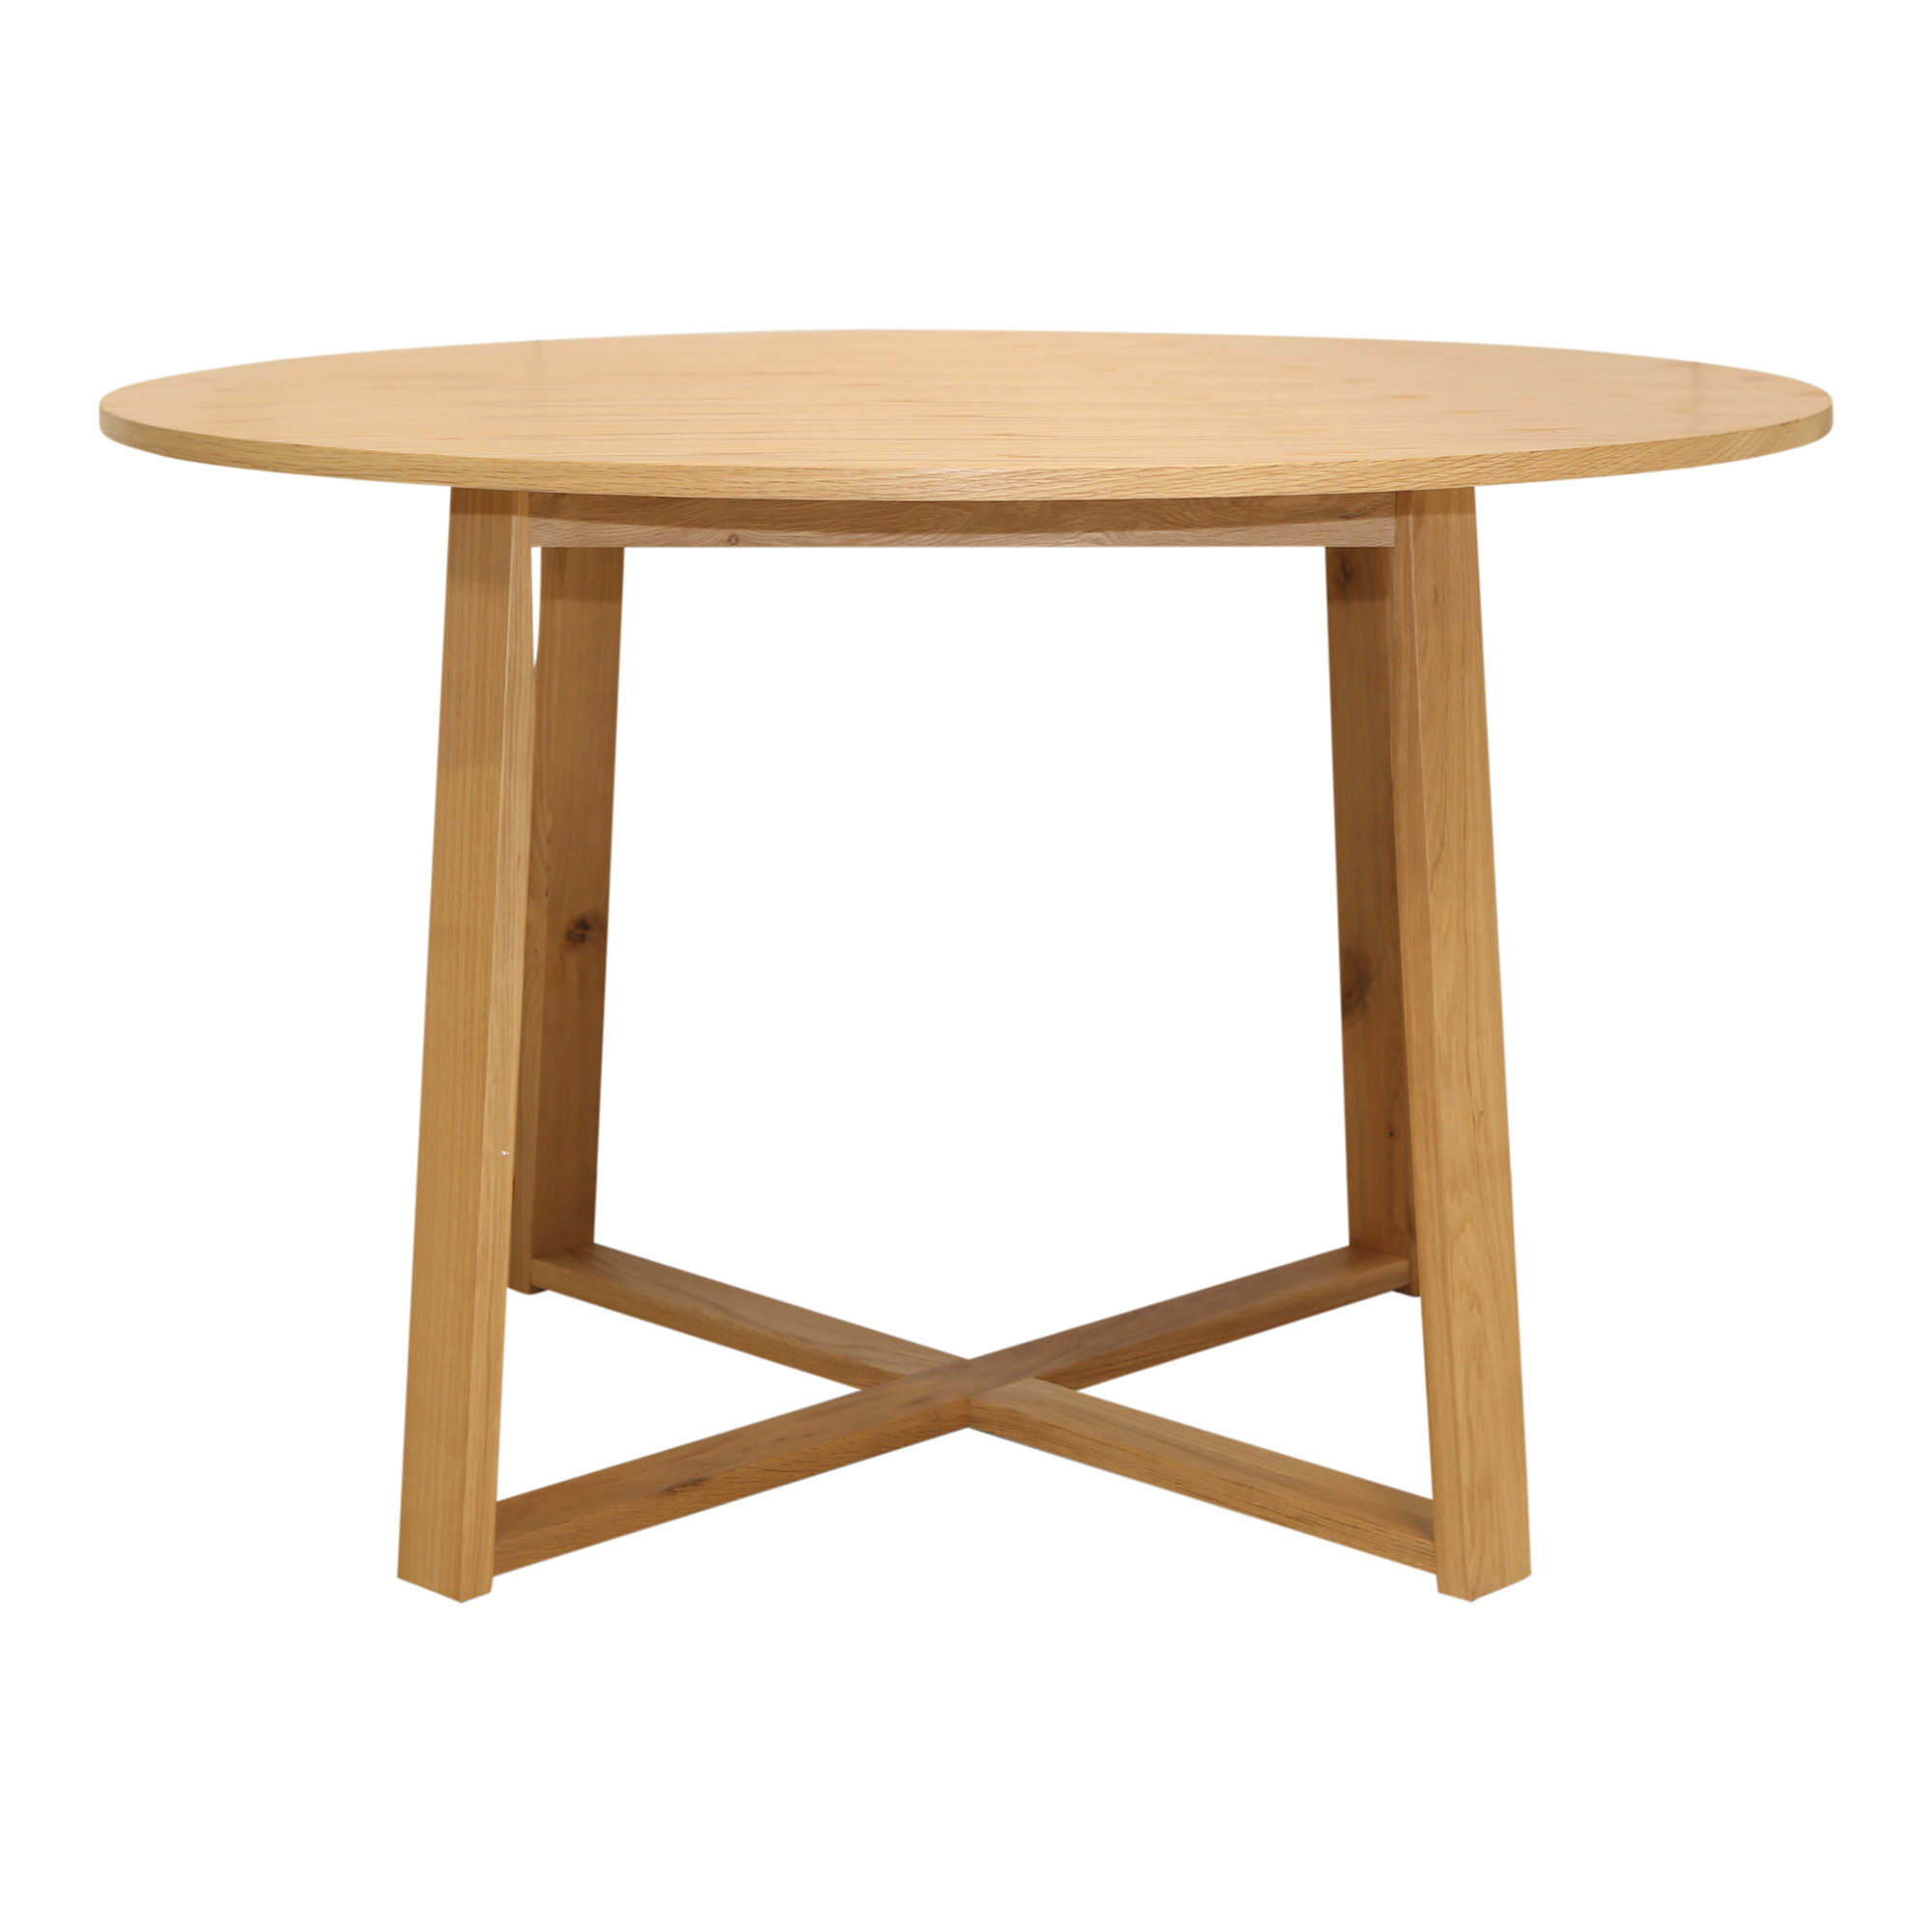 Temple Webster Olwen Oak Wood Round Dining Table Reviews